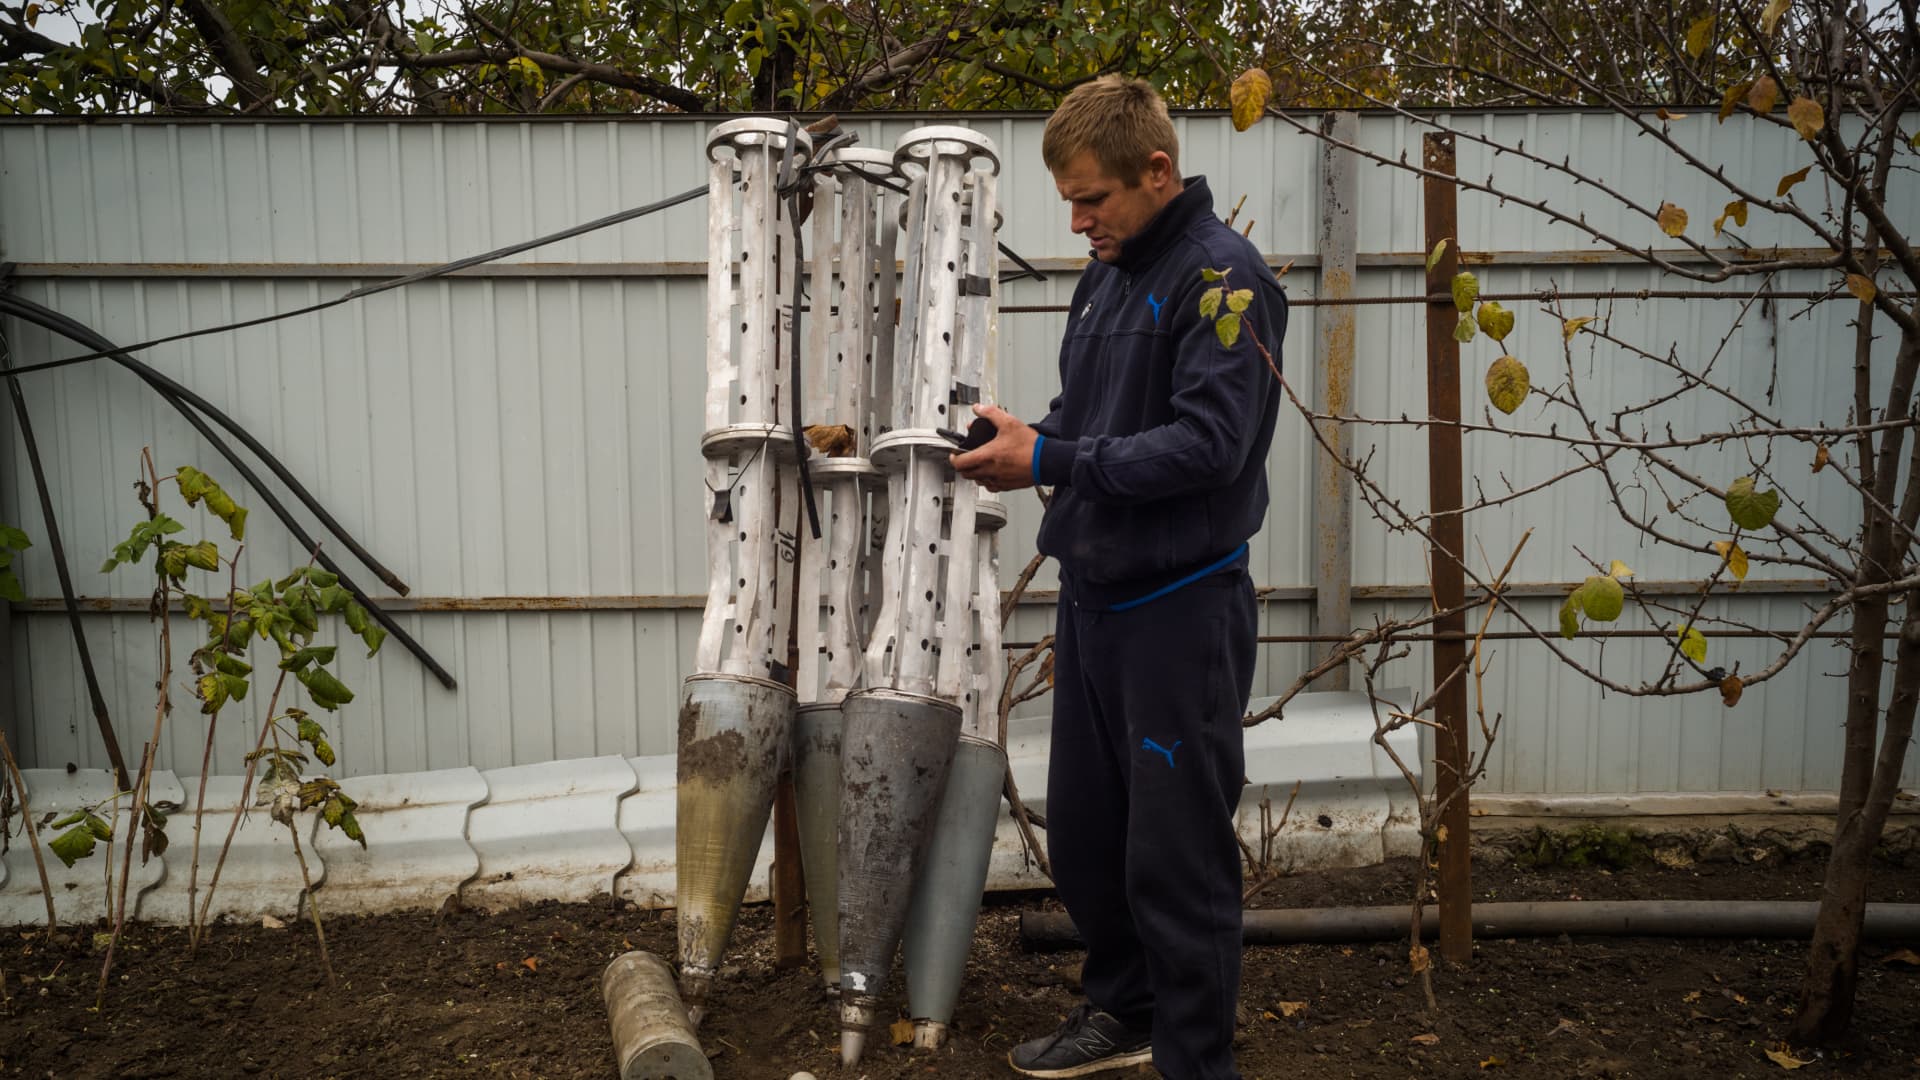 Though not banned by the United States, Russia or Ukraine, cluster bombs are outlawed in over 100 countries under a global pact, the Convention on Cluster Munitions, because of the danger they pose to civilians.